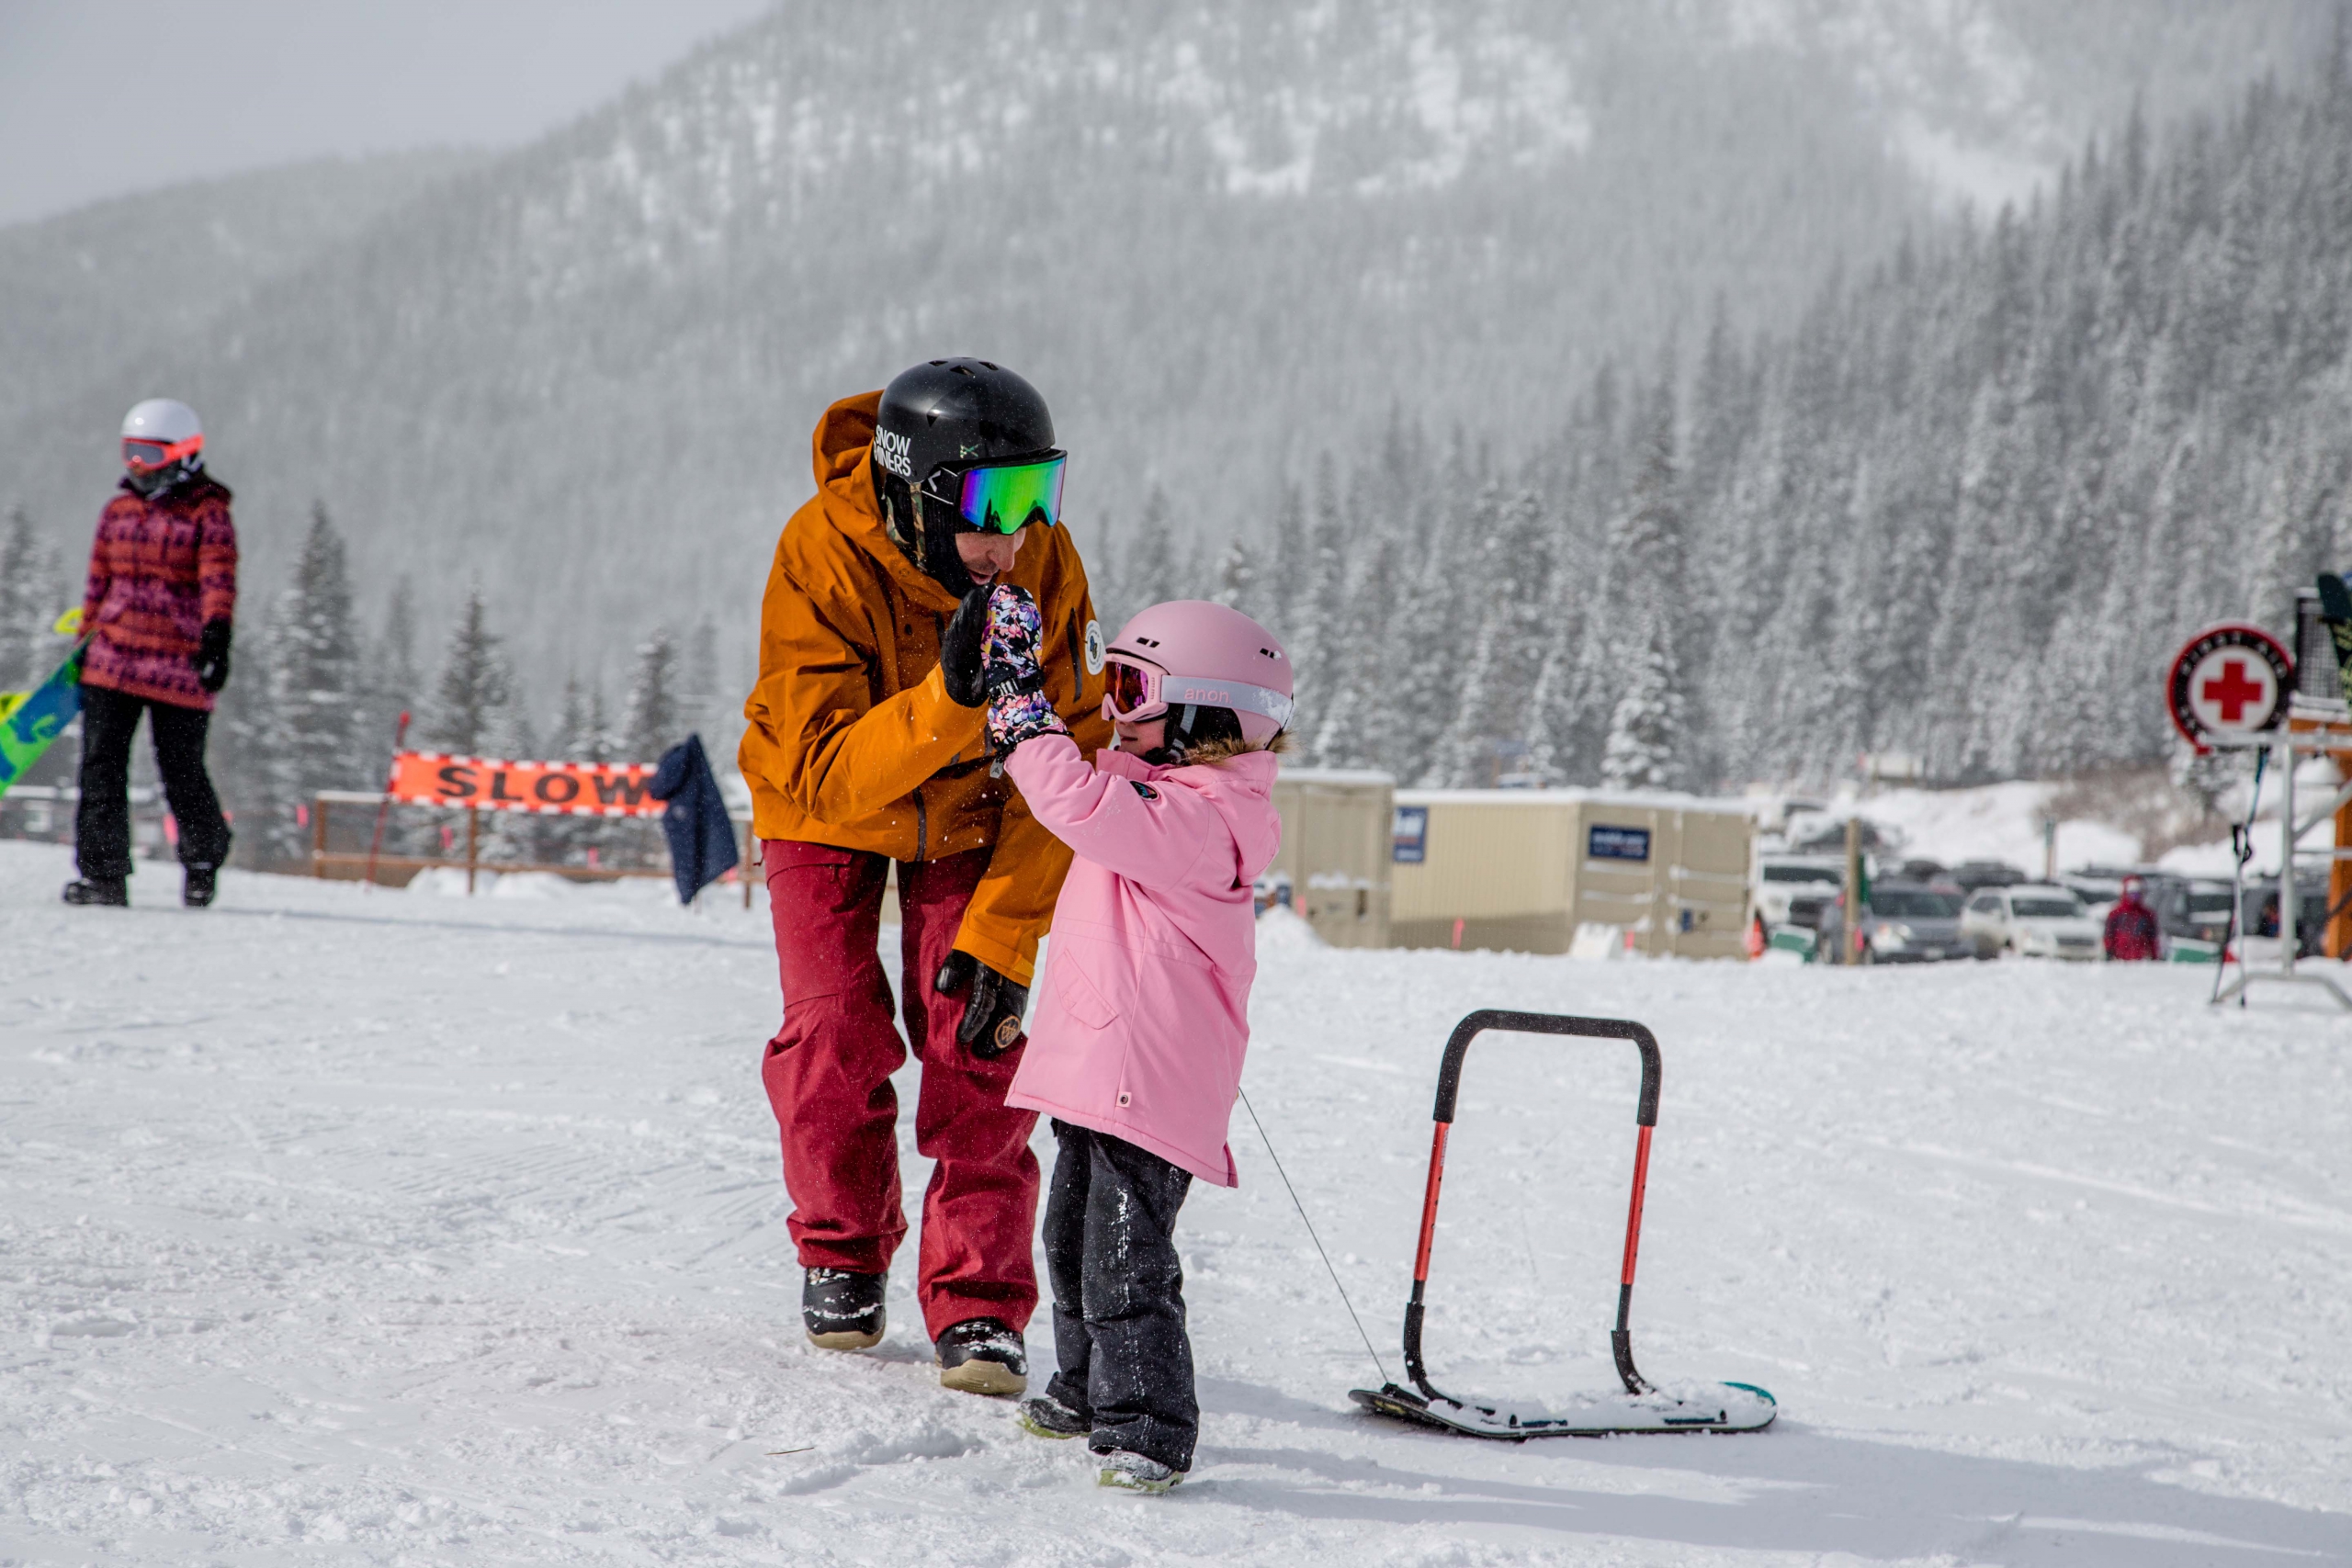 AASI Team Member Tony Macri high fives a young student in a snowboard lesson